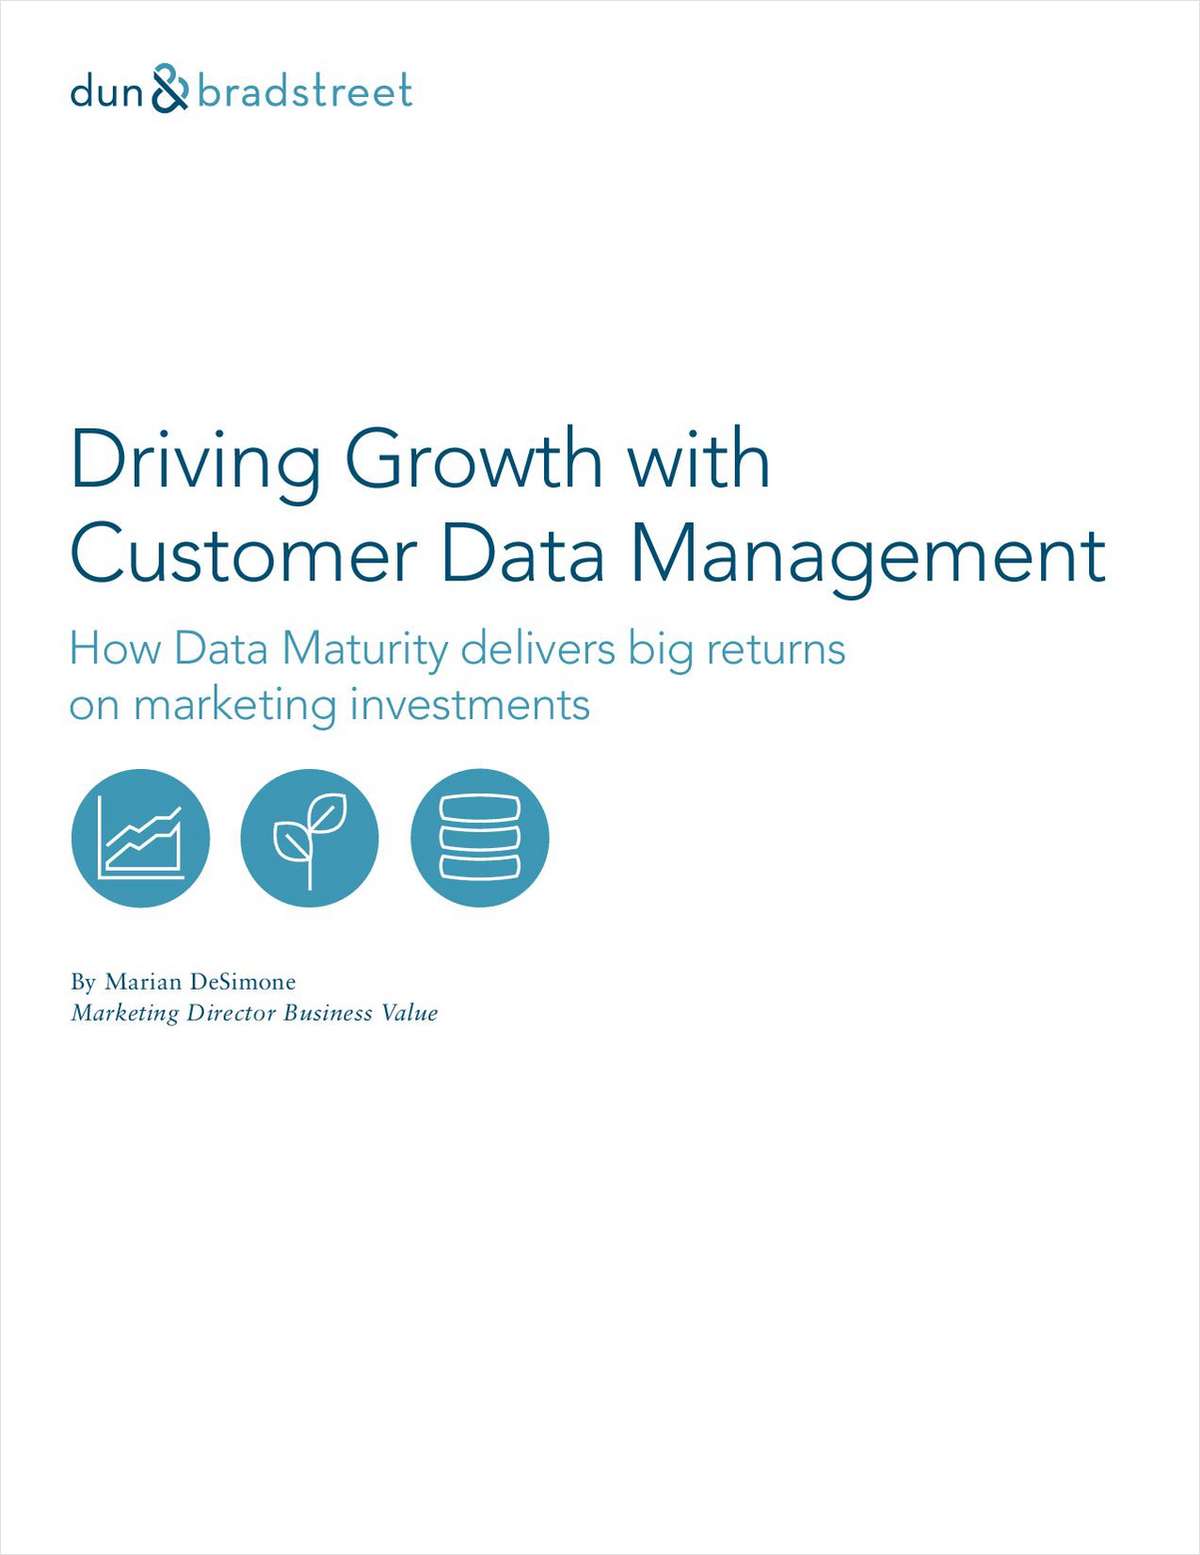 Making a Business Case for Customer Data Management in Marketing